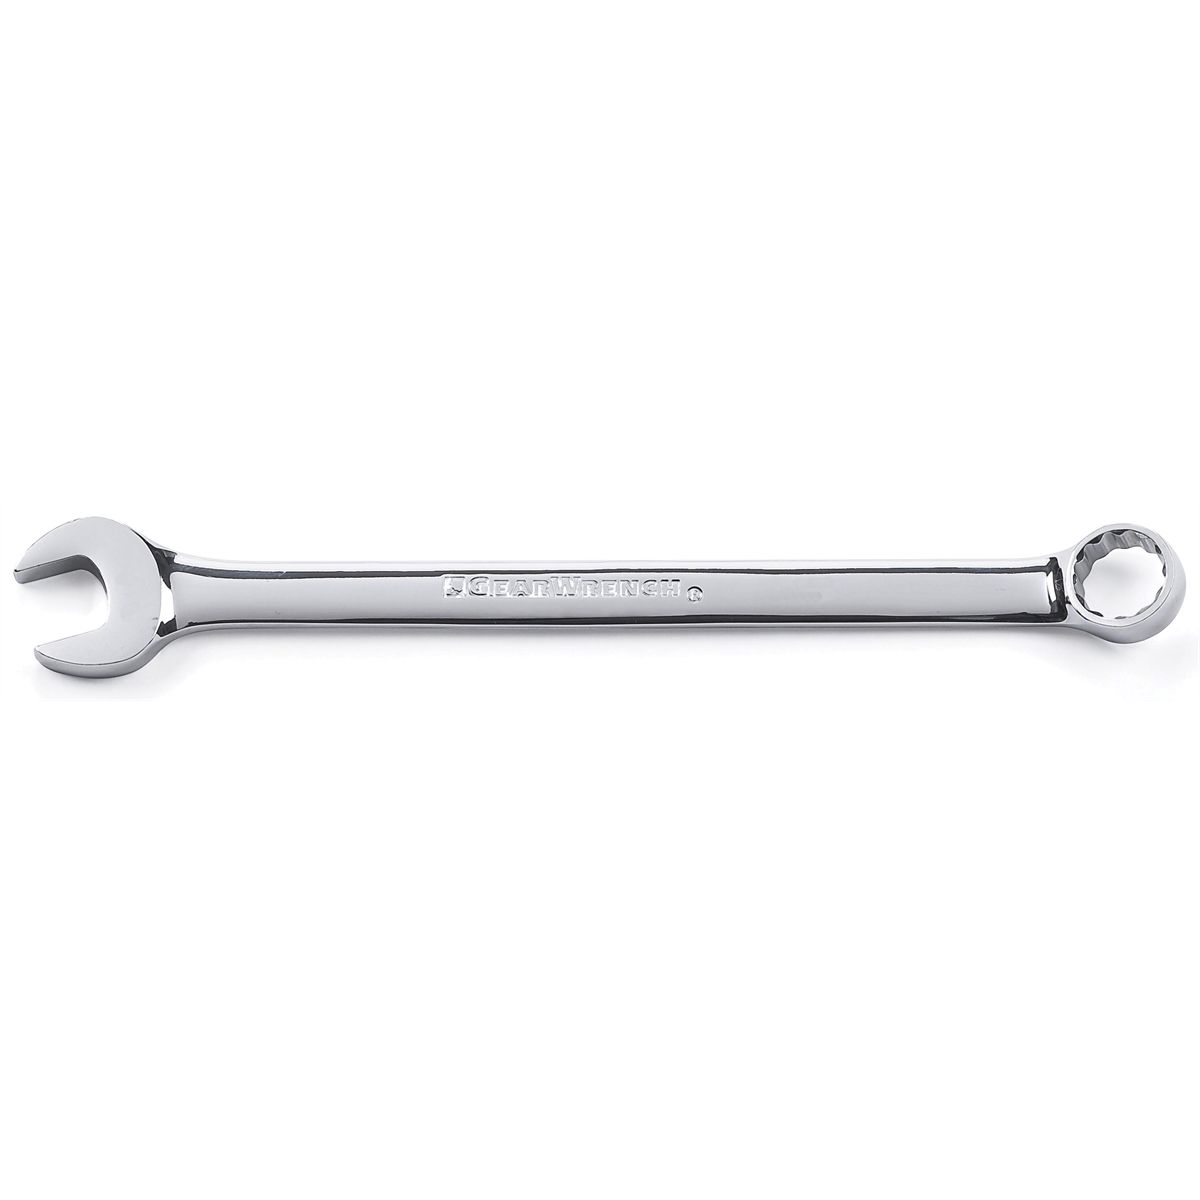 7/16" Long Pattern Combination Wrench